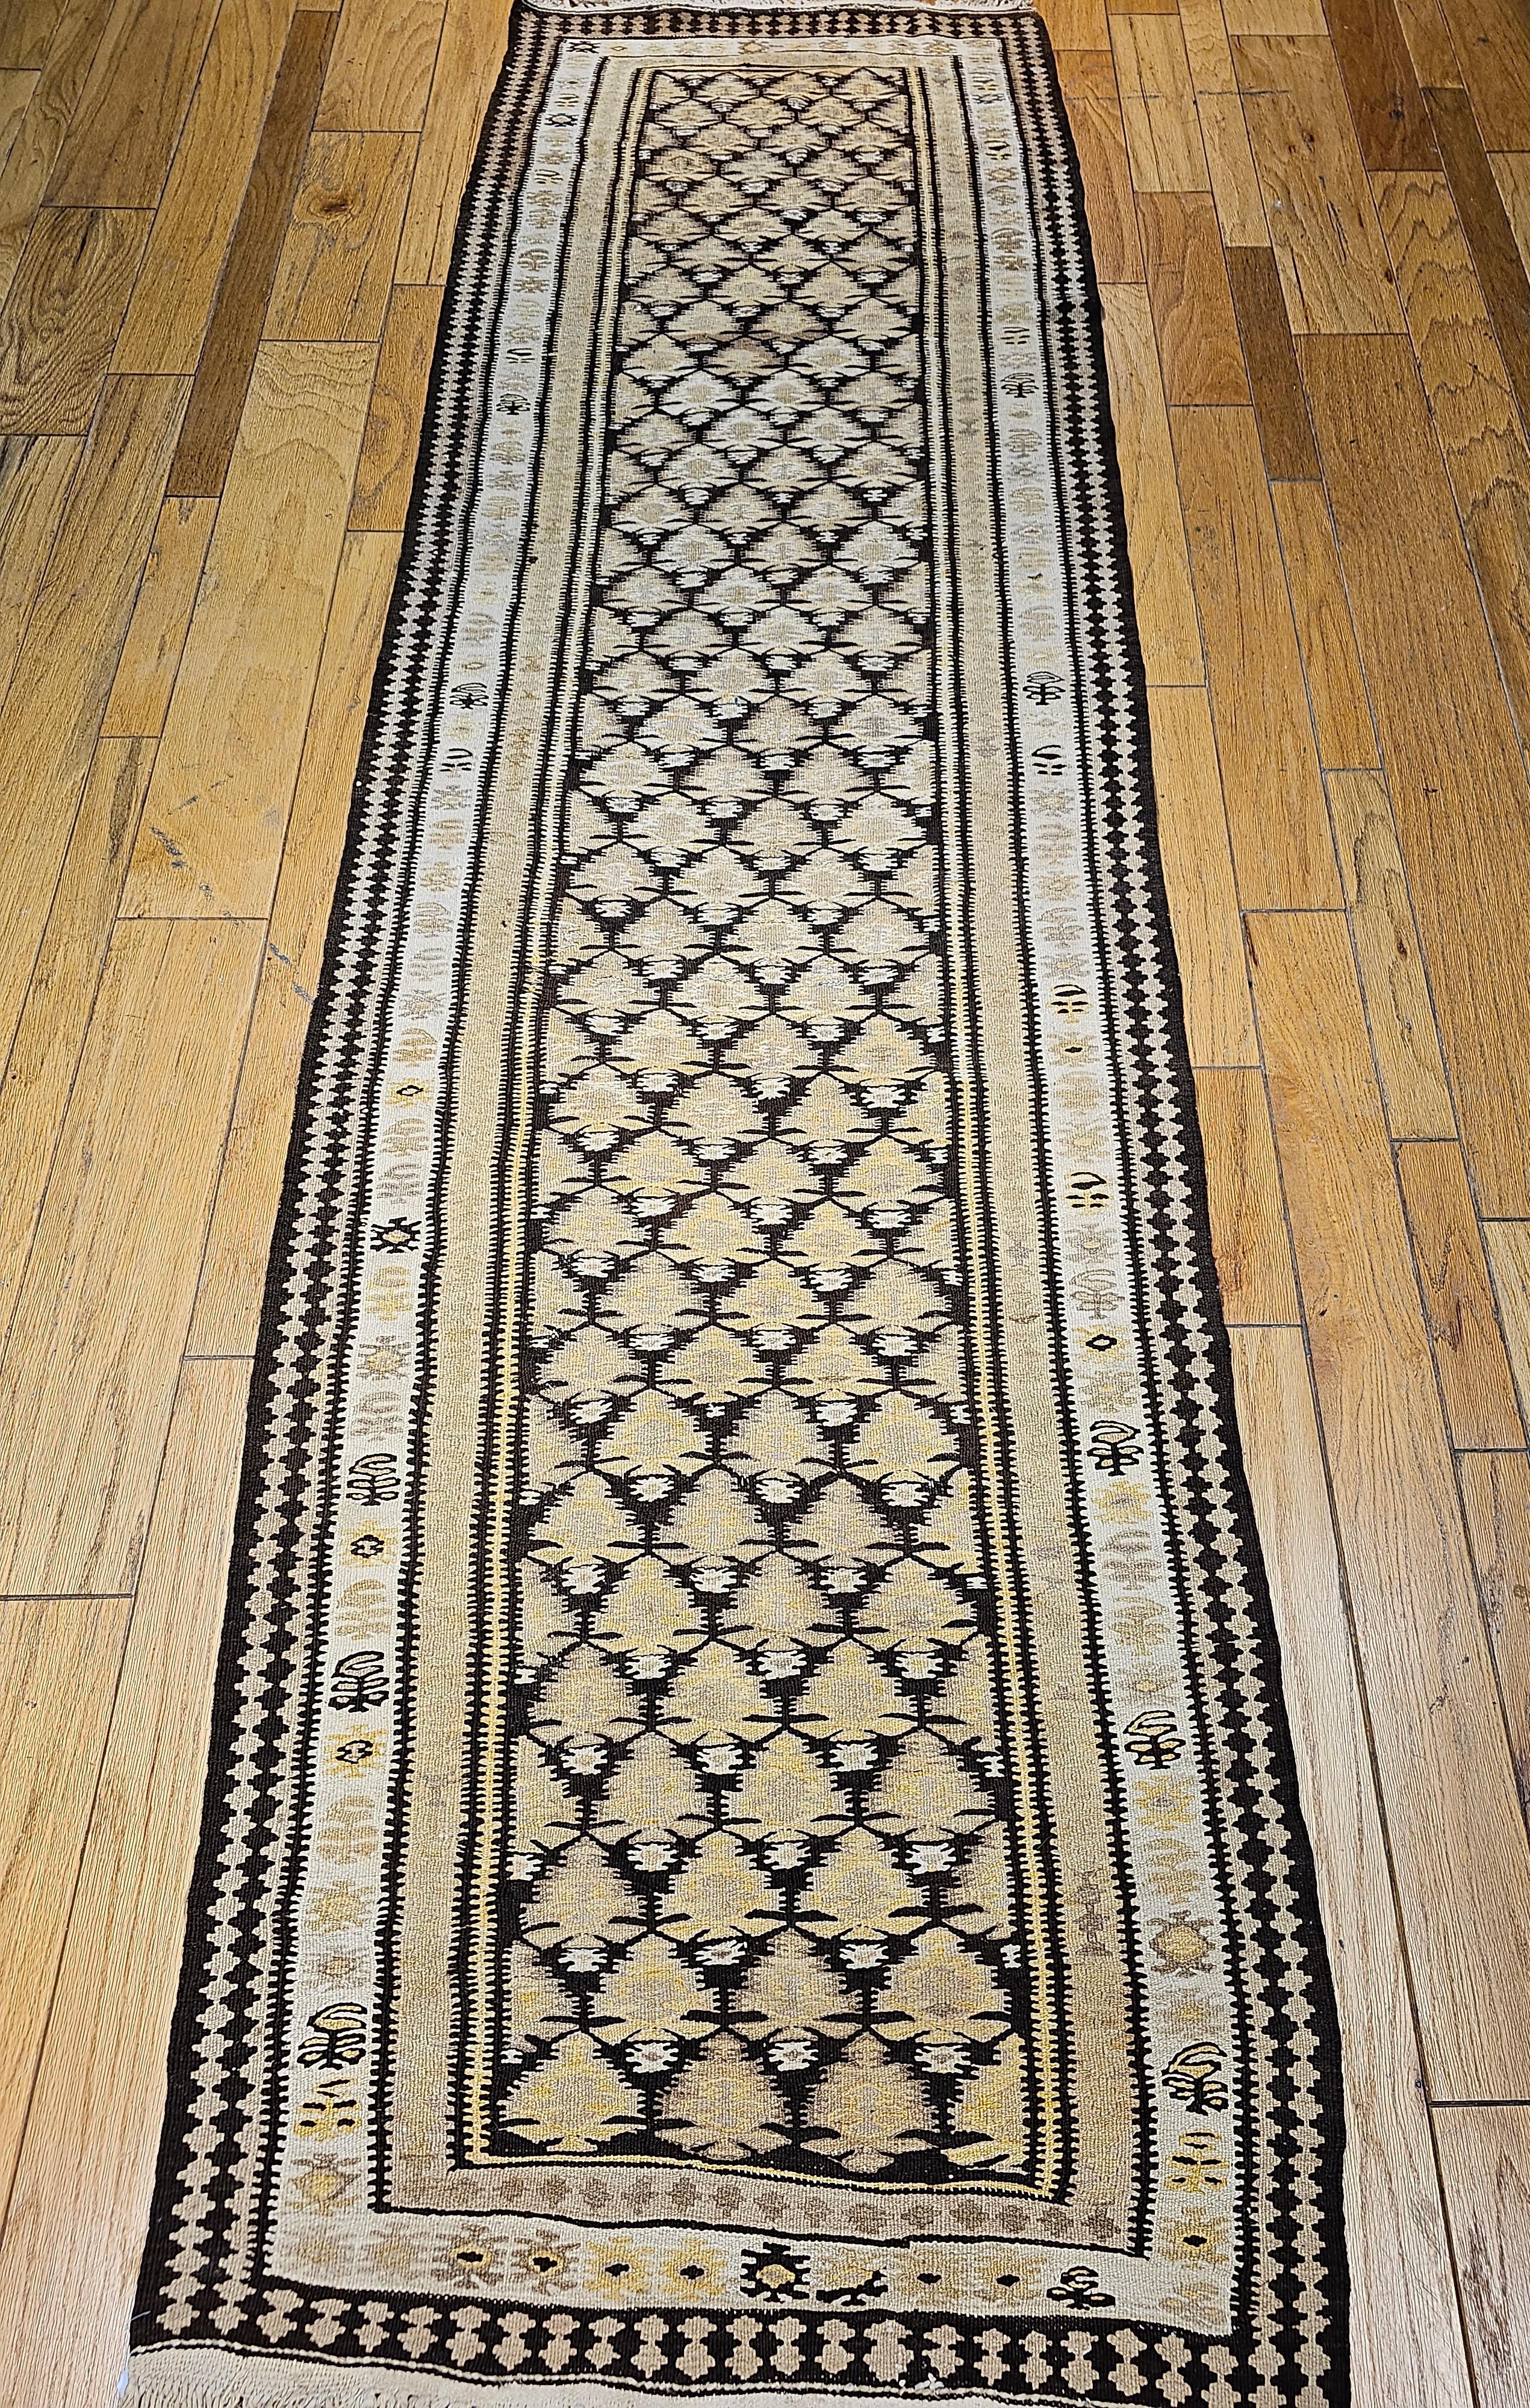 Vintage Persian Kilim (flat woven) runner has a brilliant geometric design and wonderful colors.   Beautiful Persian kilim runner is from the city of Qazvin in central Persia which was a major stop on the ancient Silk Road.   The allover design is a